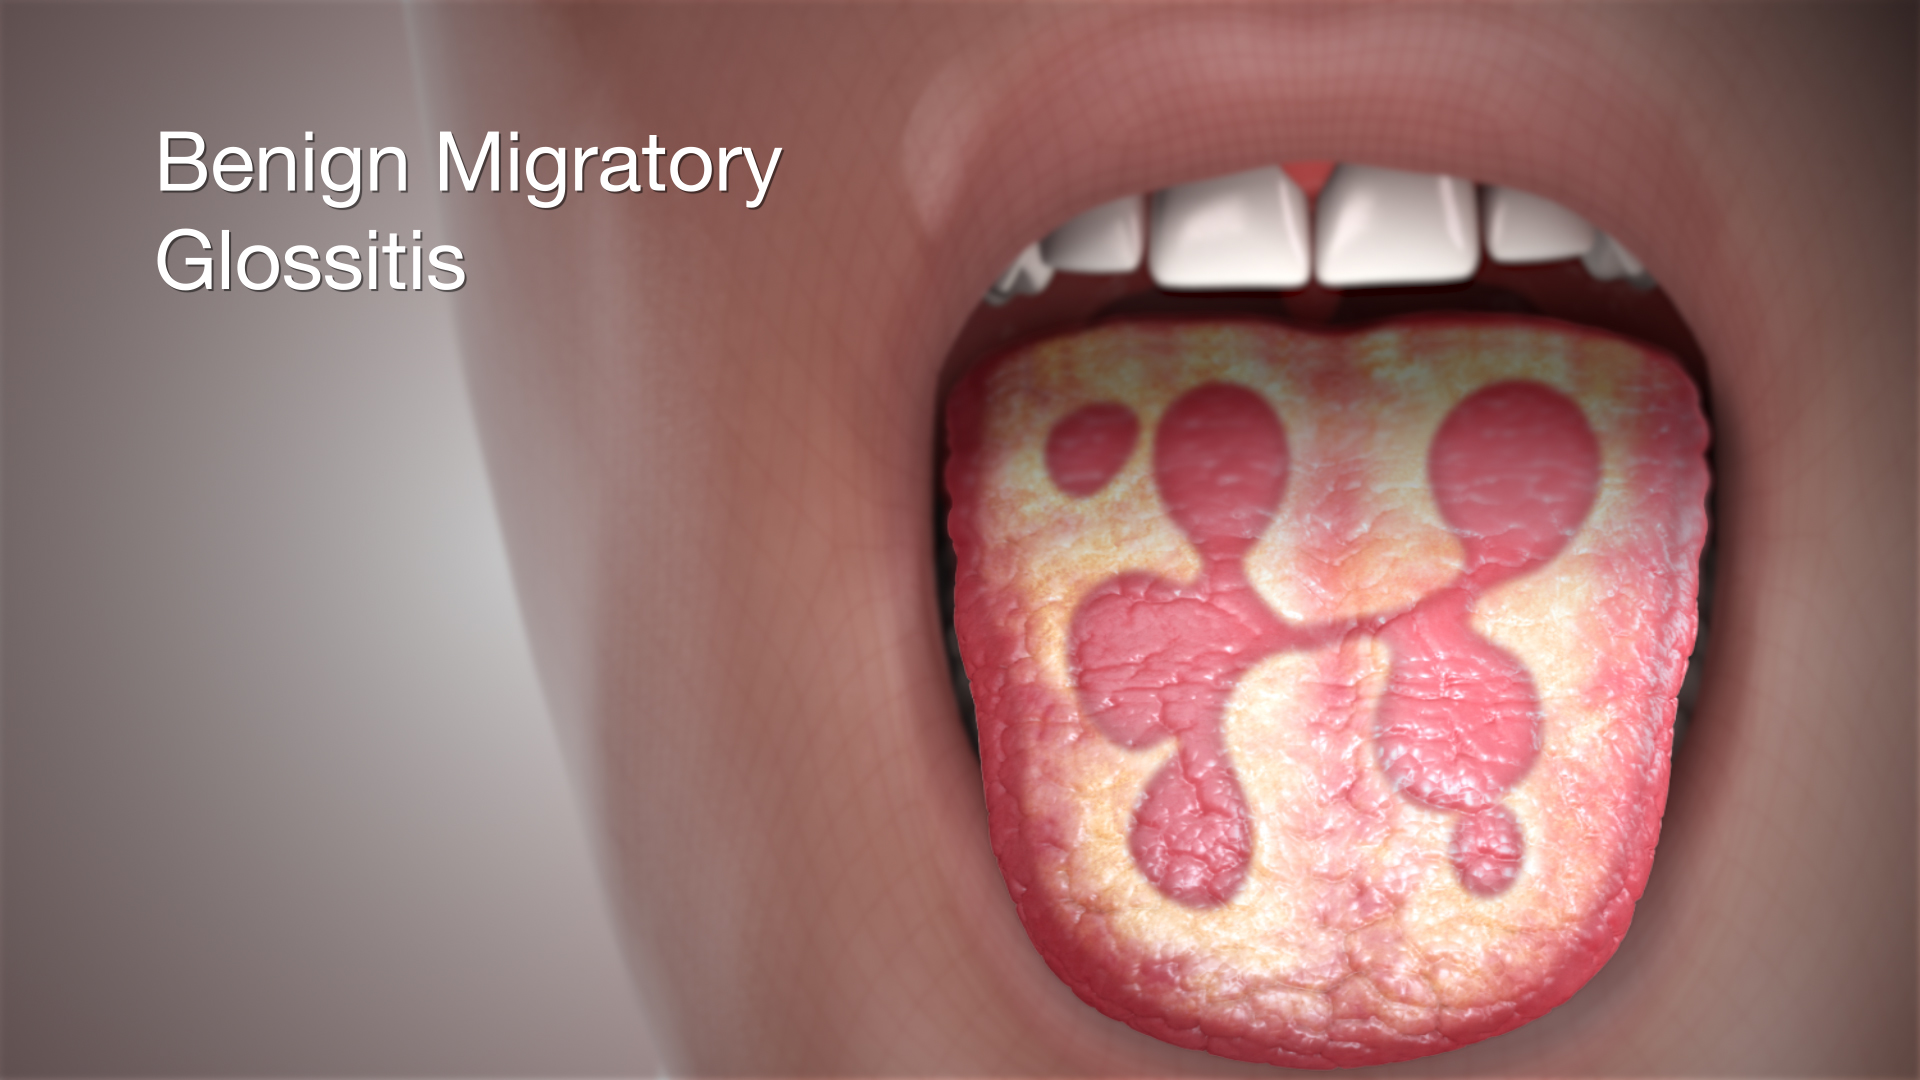 Benign Migratory Glossitis Illustrated Using A 3D Medical Animation